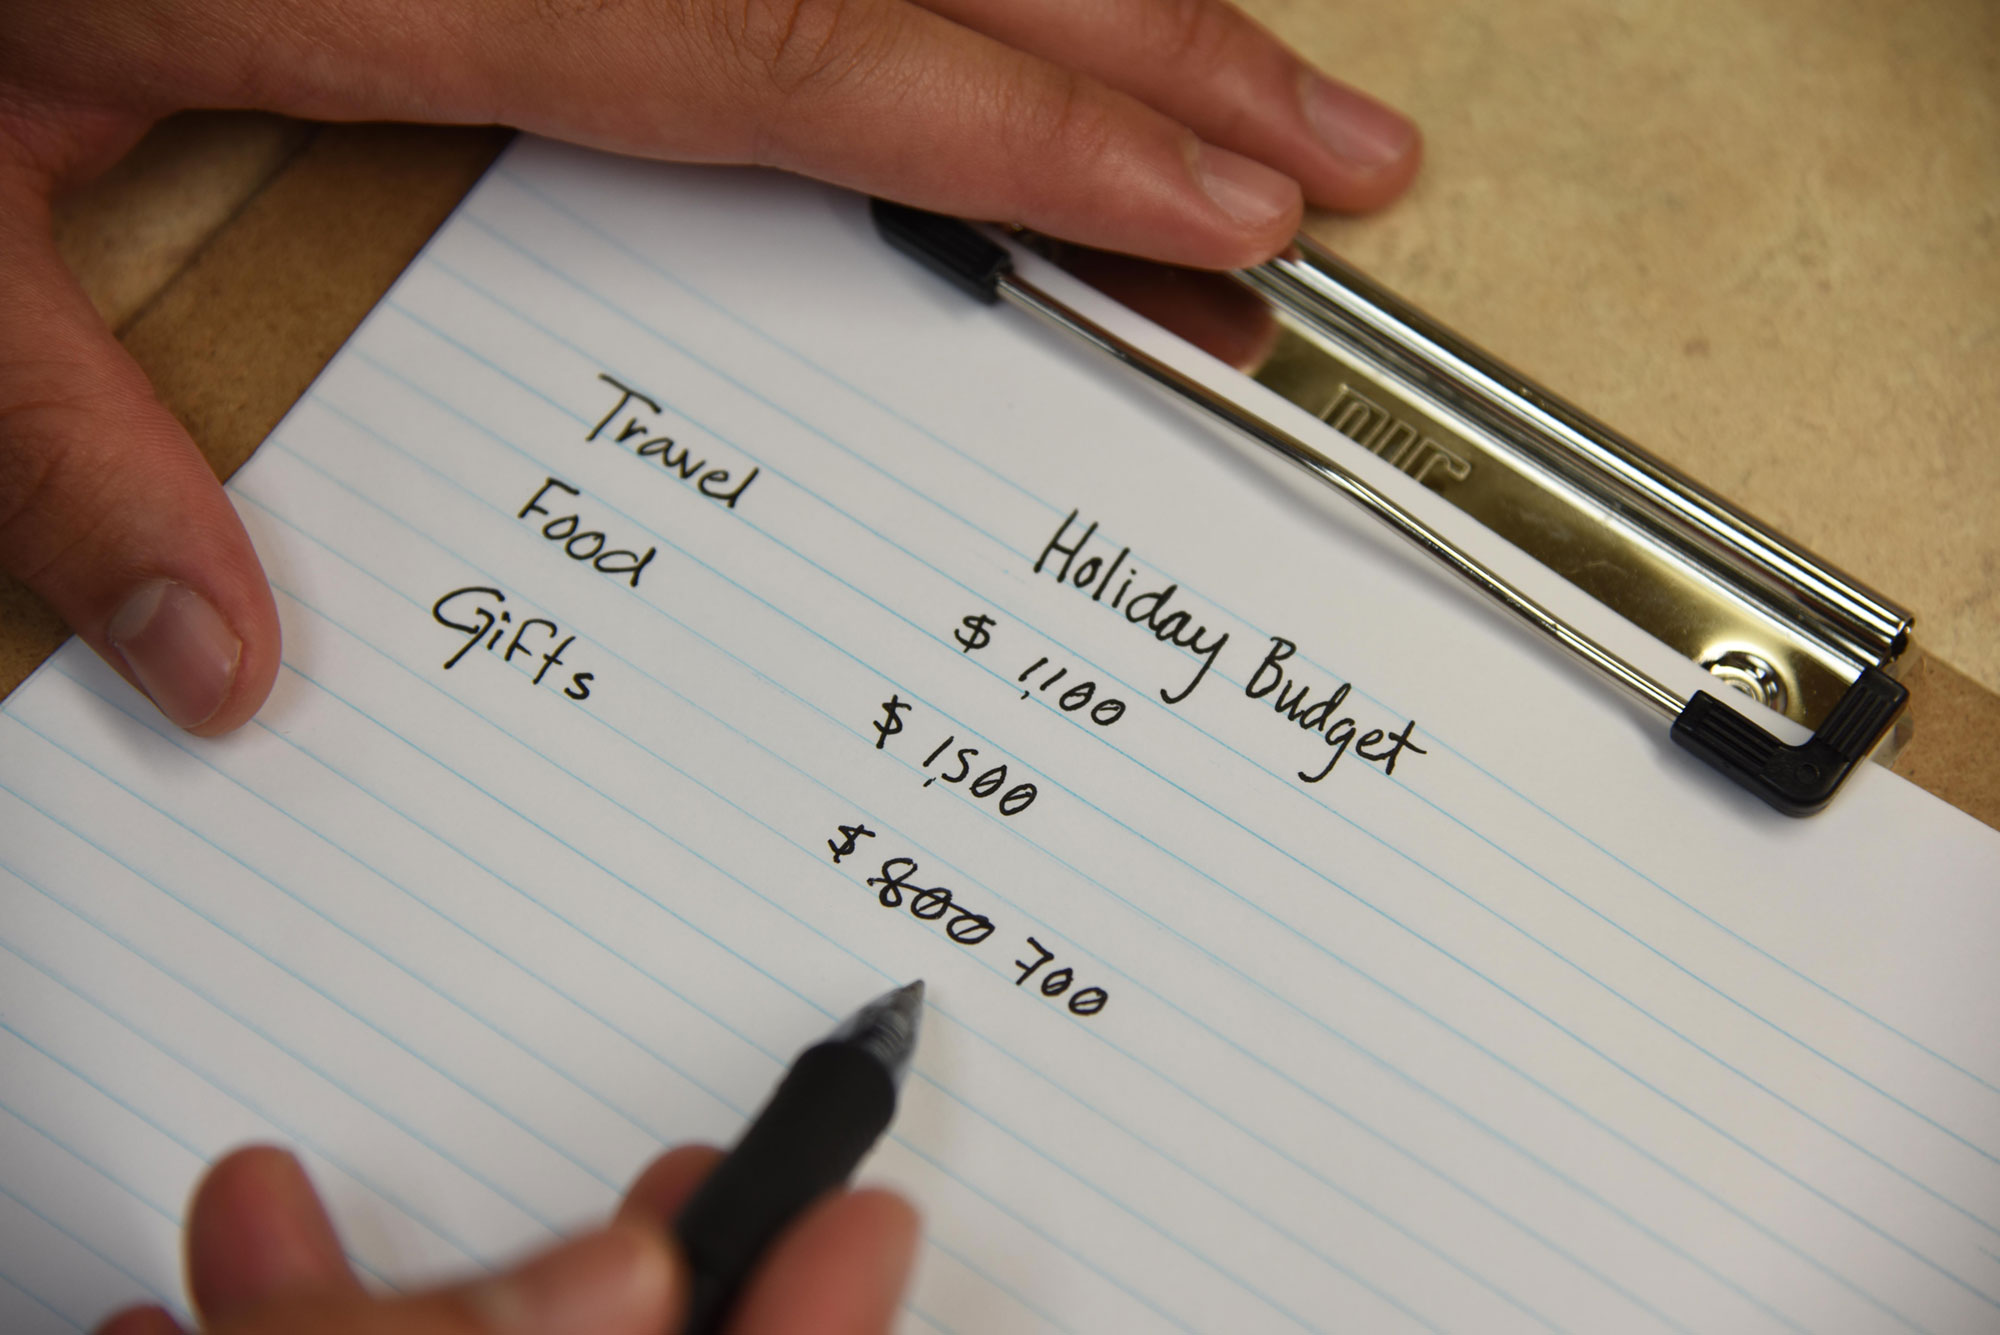 Hands writing out a holiday budget on a notepad.